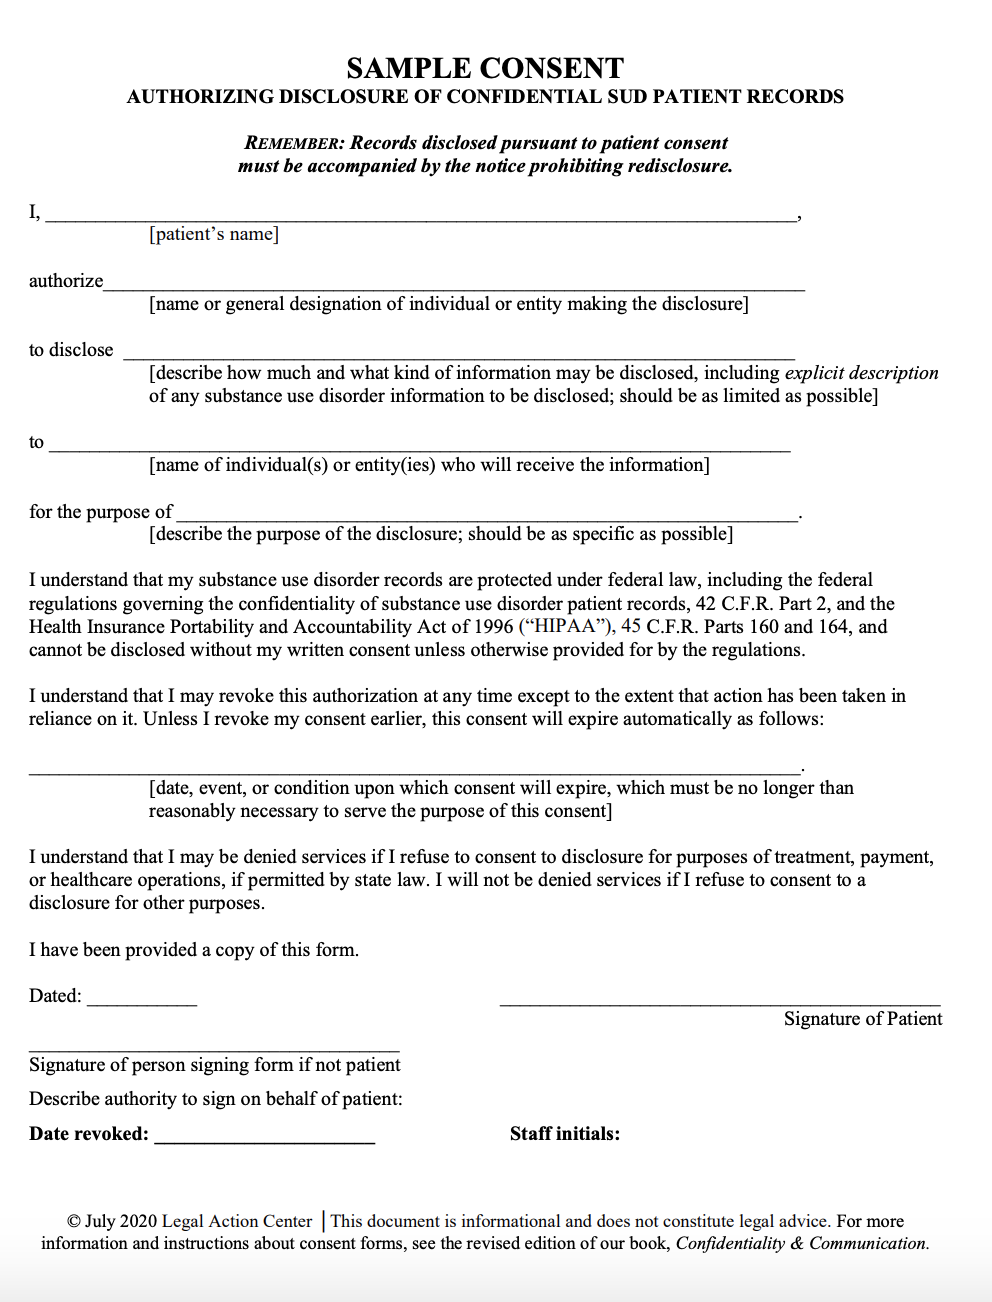 Legal Action Center  Sample Forms Regarding Substance Use Treatment Throughout therapy confidentiality agreement template